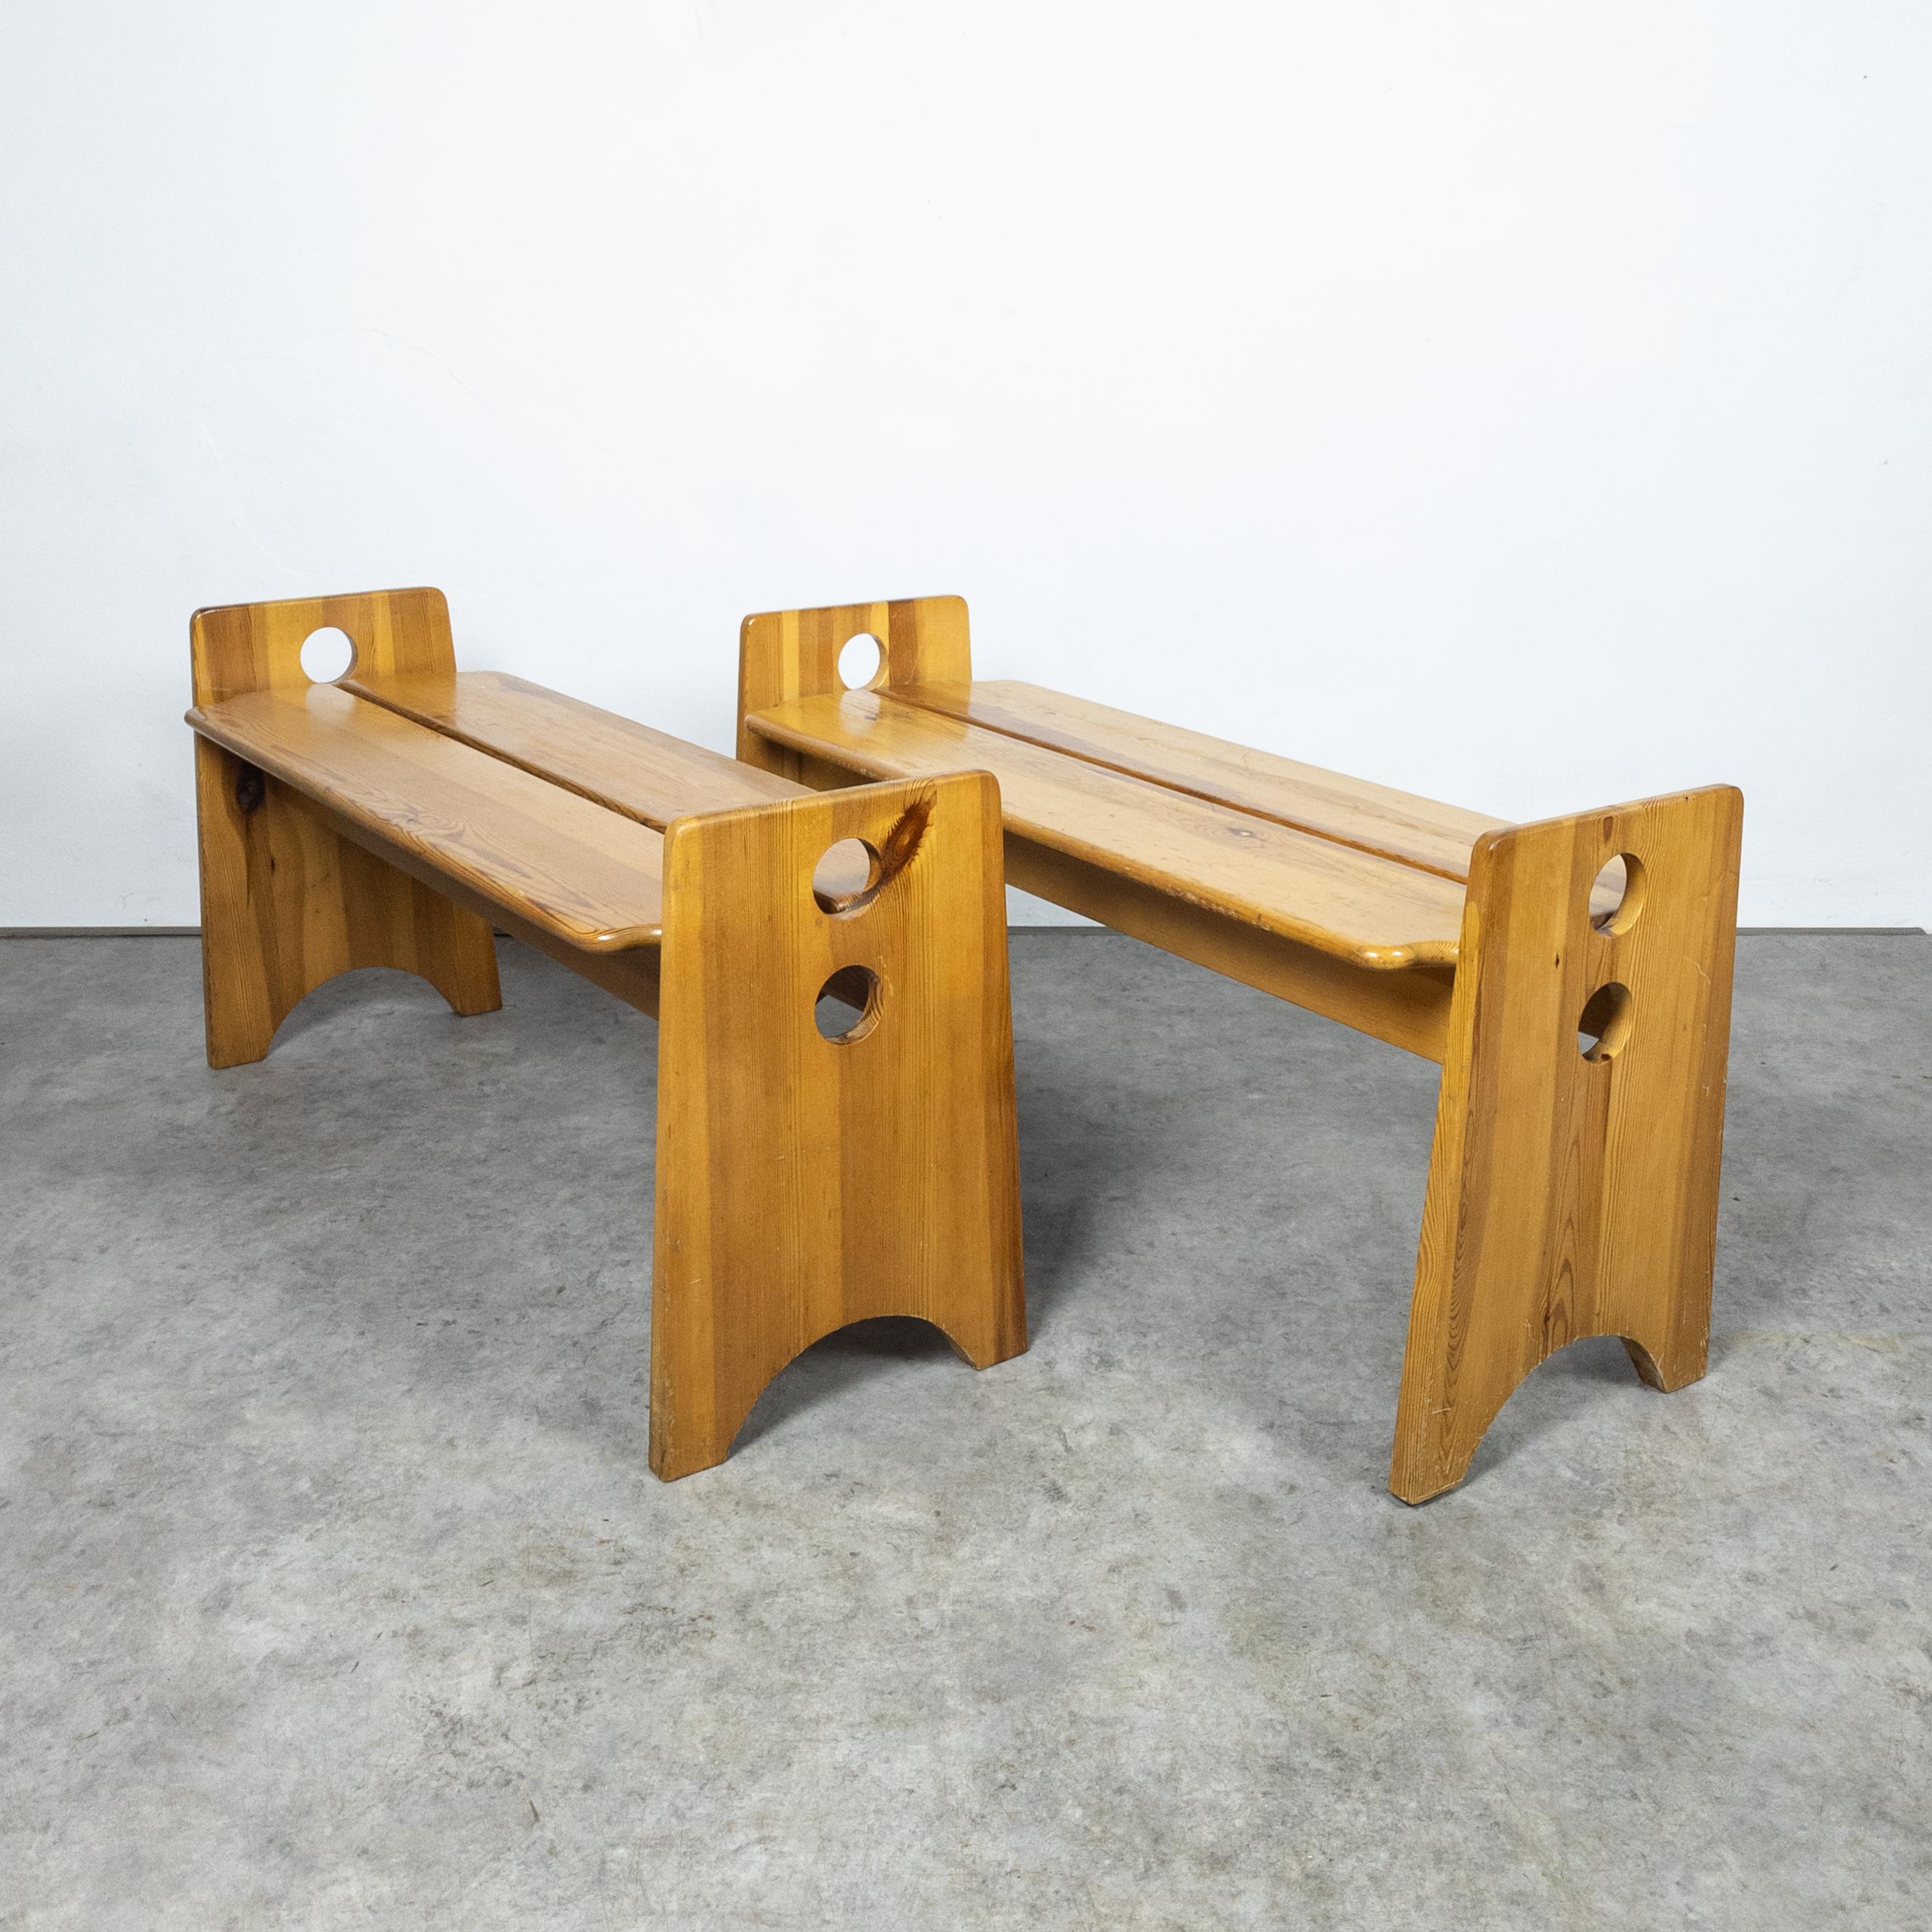 Sculptural Dining Set in Pine by Gilbert Marklund for Furusnickarn AB, 1970s For Sale 3